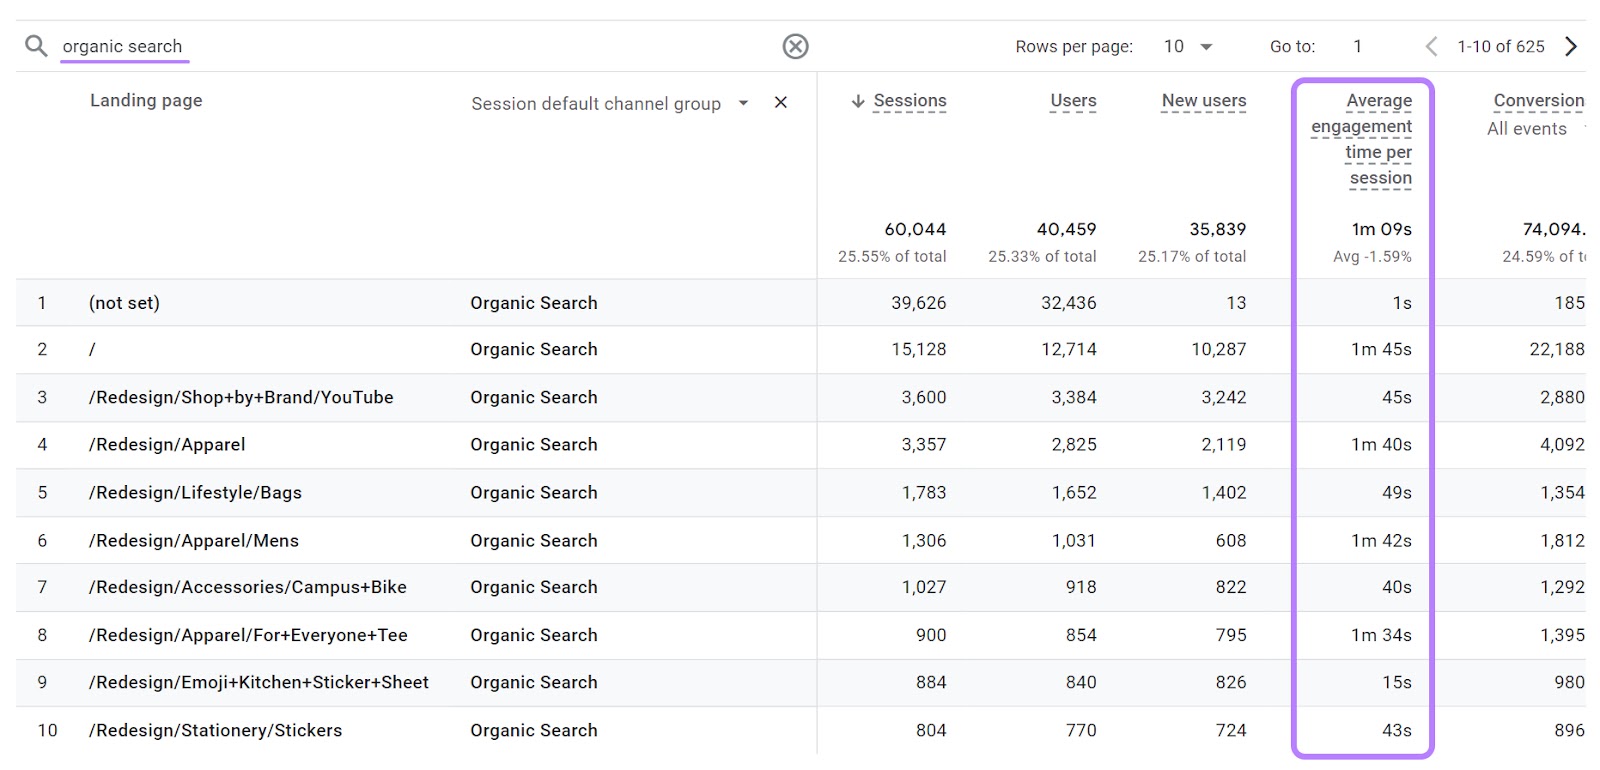 “Average engagement time per session” column highlighted for organic search sources